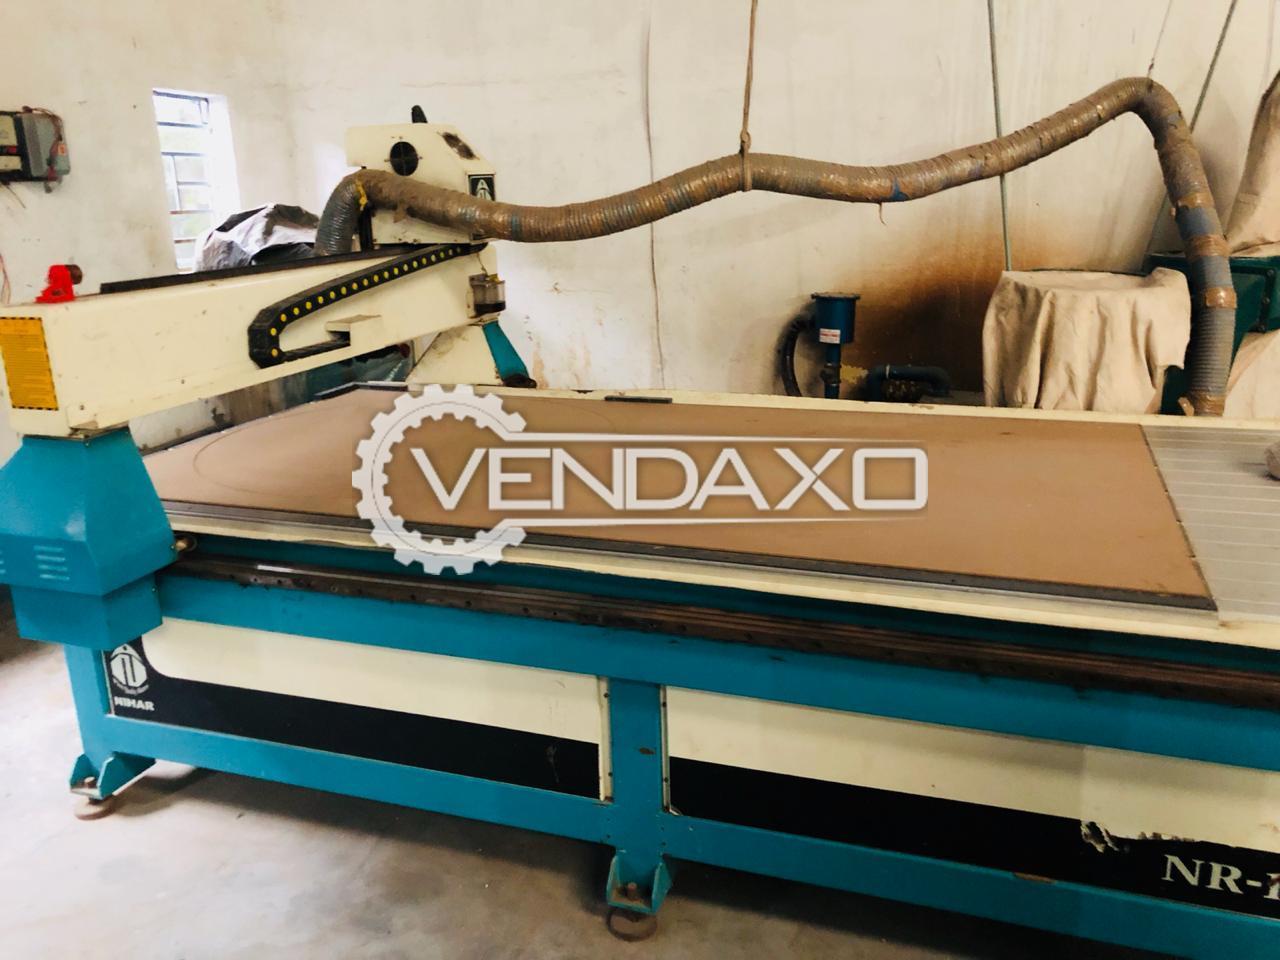 Used Other Wood Processing Machinery For Sale Buy Or Sell Used Other Wood Processing Machinery Online Vendaxo